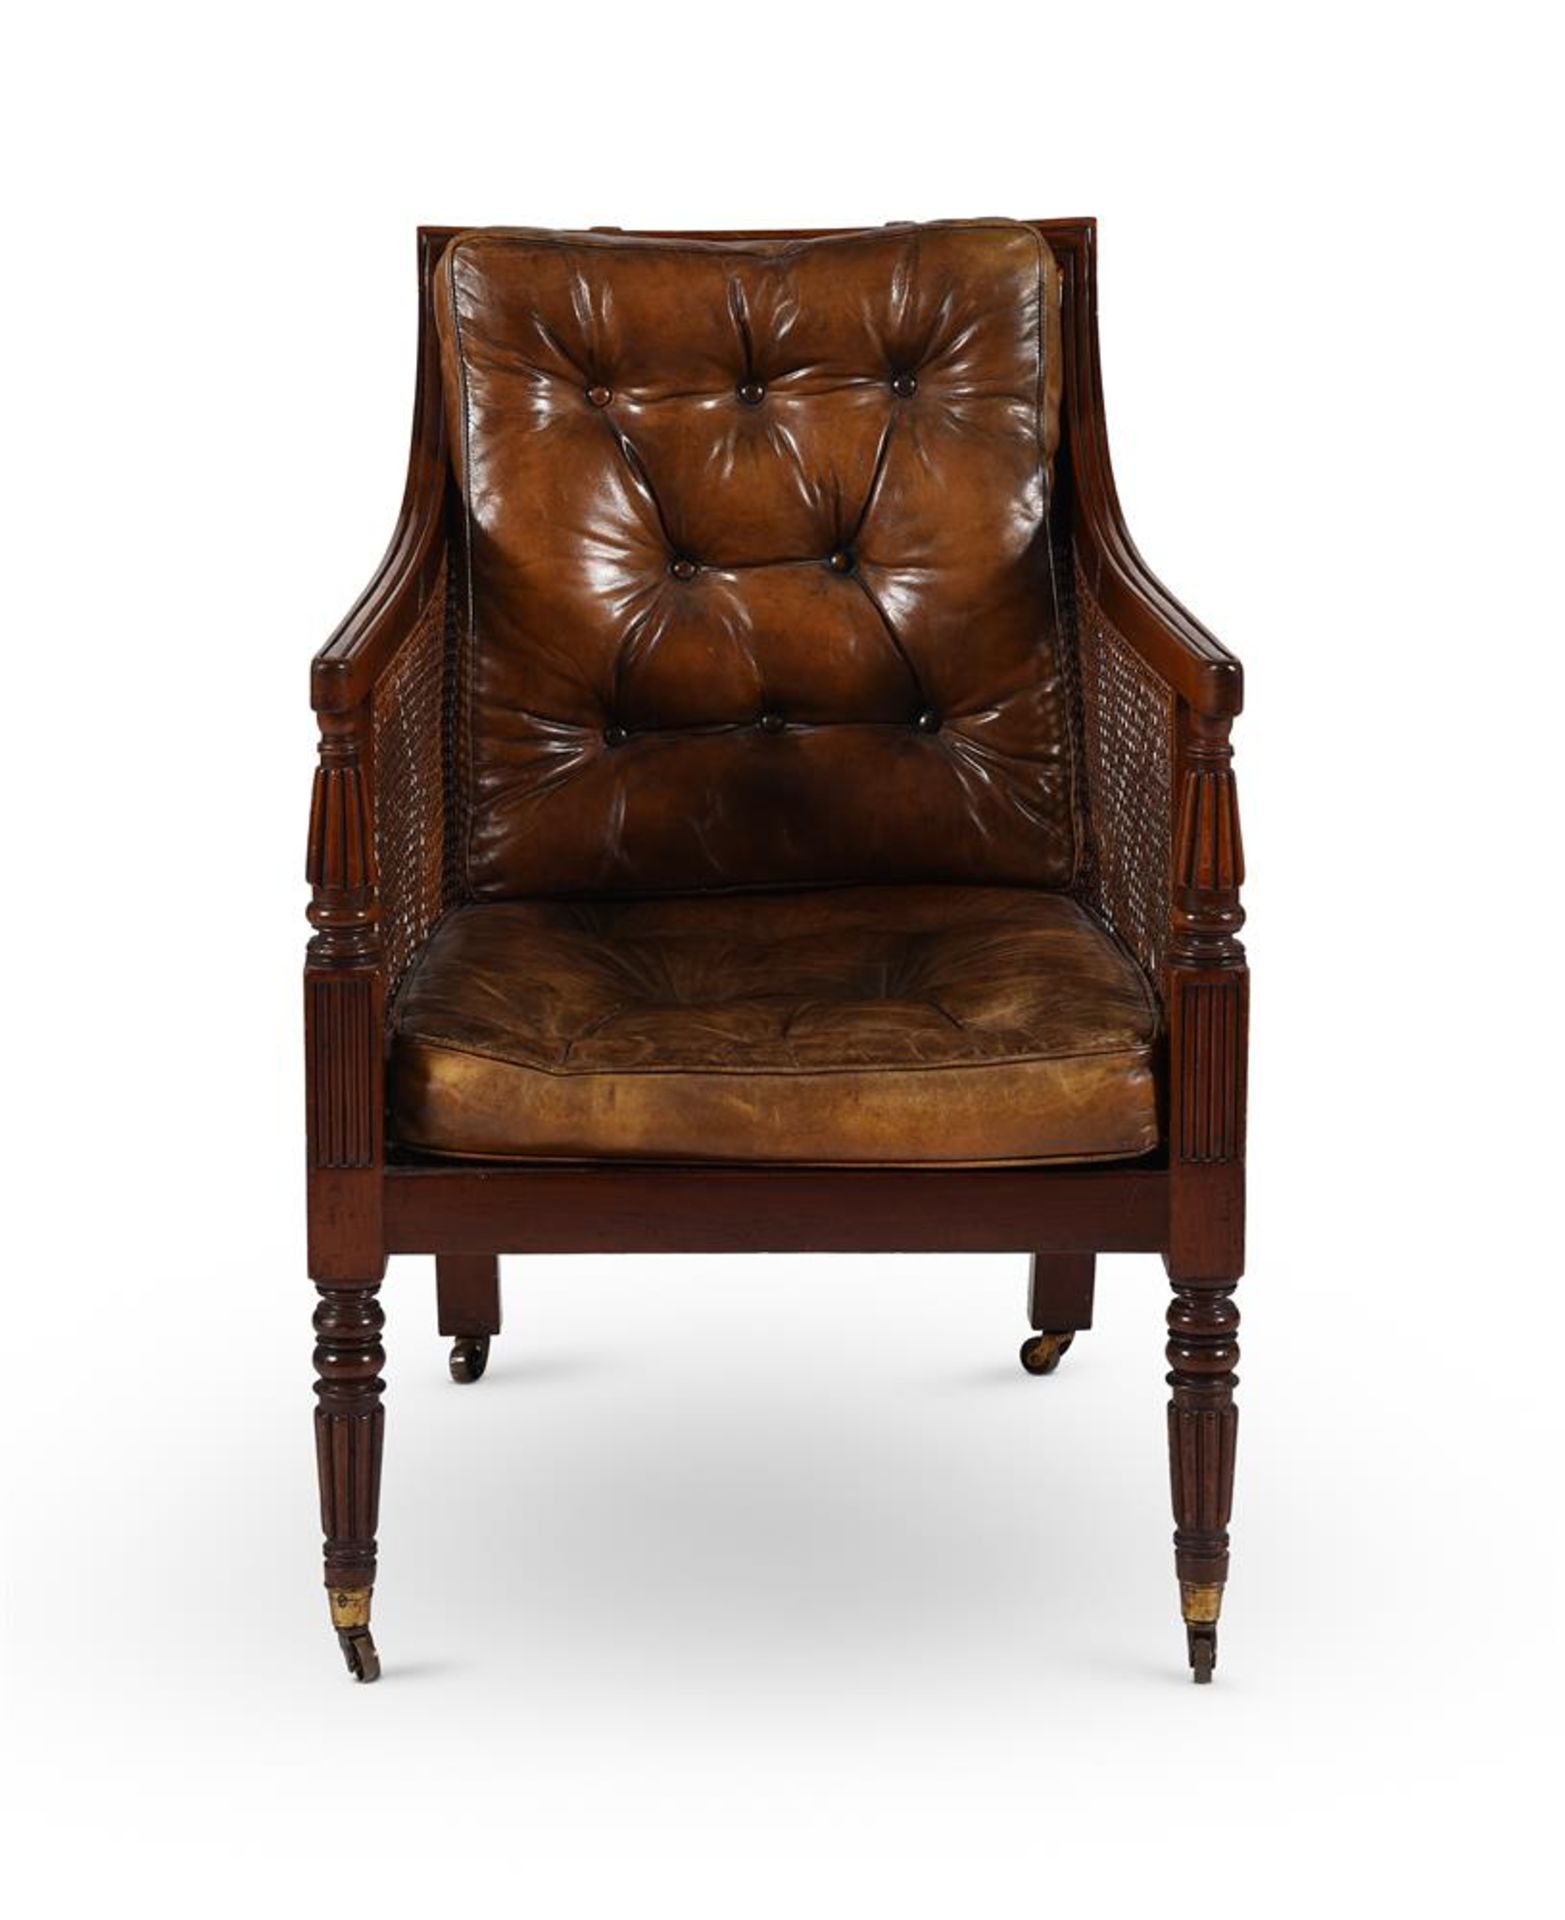 A GEORGE IV MAHOGANY LIBRARY ARMCHAIR IN THE MANNER OF GILLOWS - Image 2 of 7